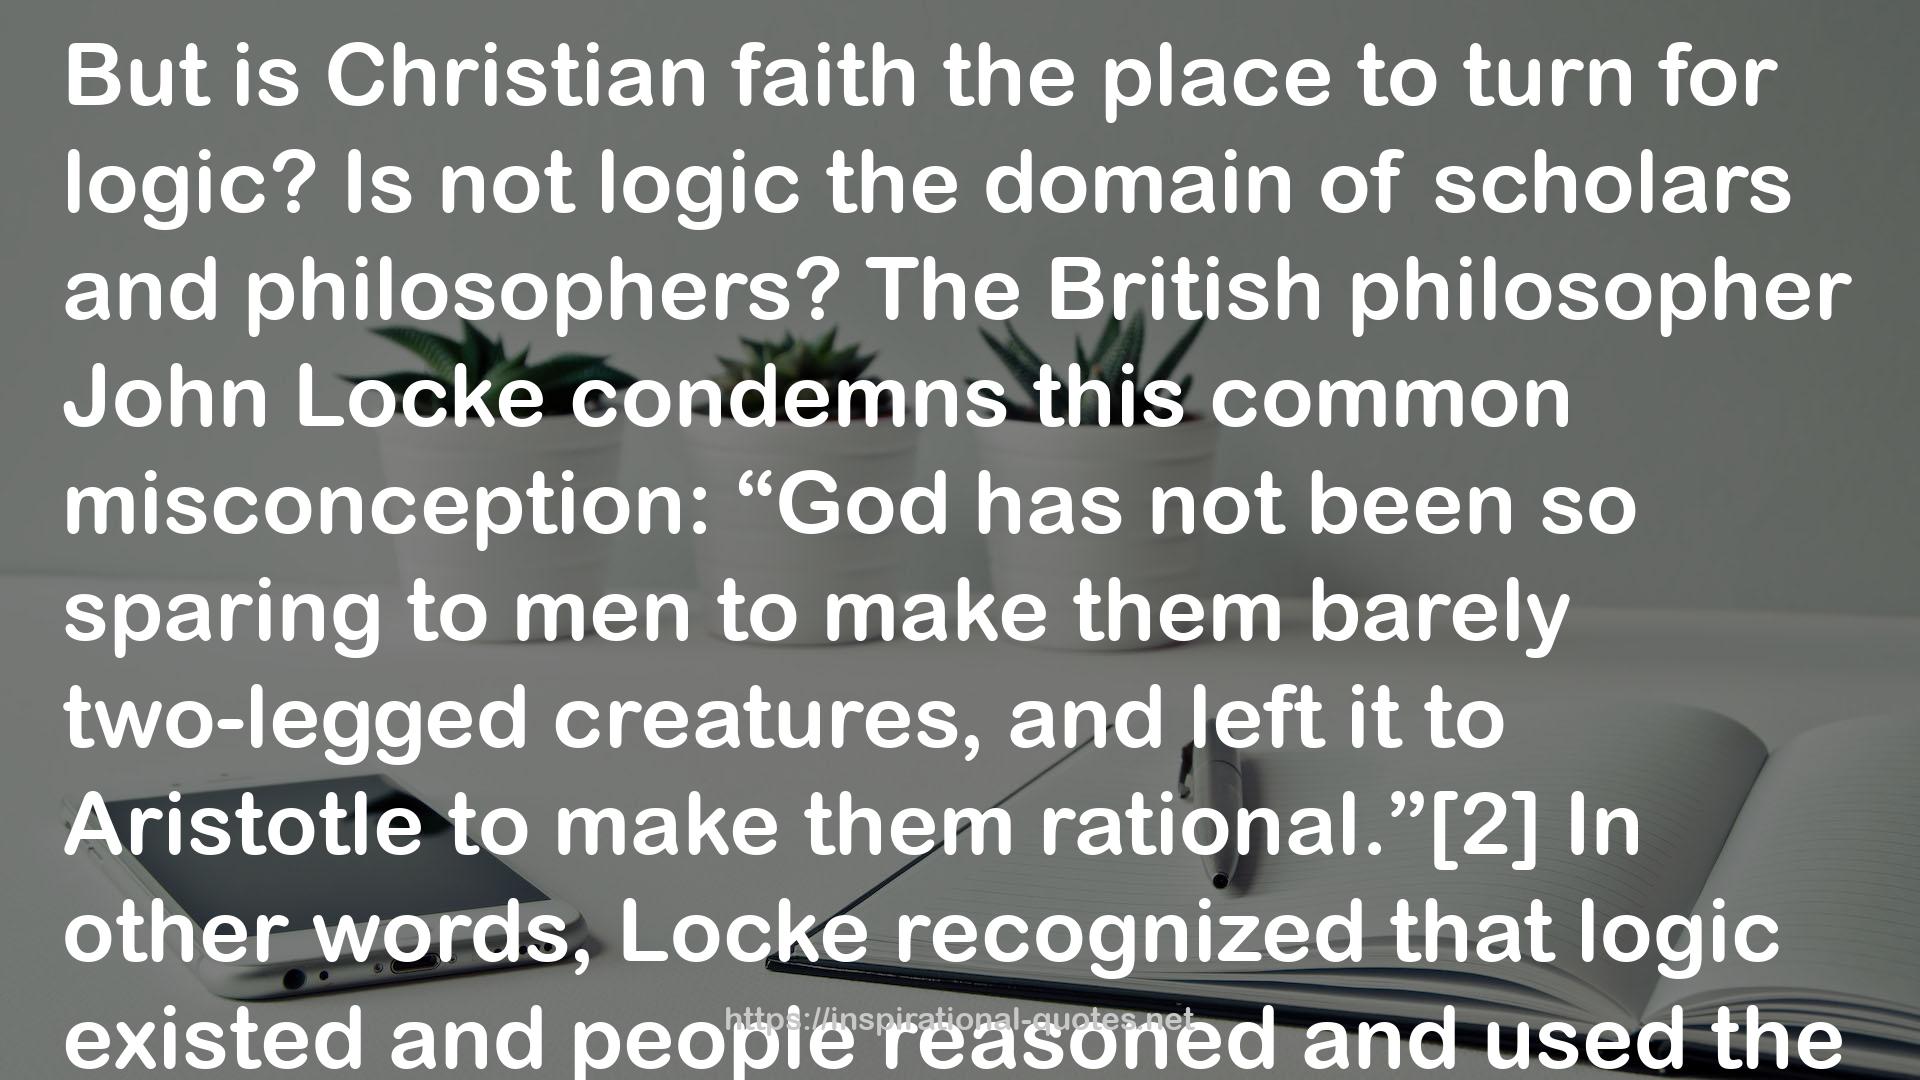 Biblical Logic In Theory and Practice: Refuting the Fallacies of Humanism, Darwinism, Atheism, and Just Plain Stupidity QUOTES